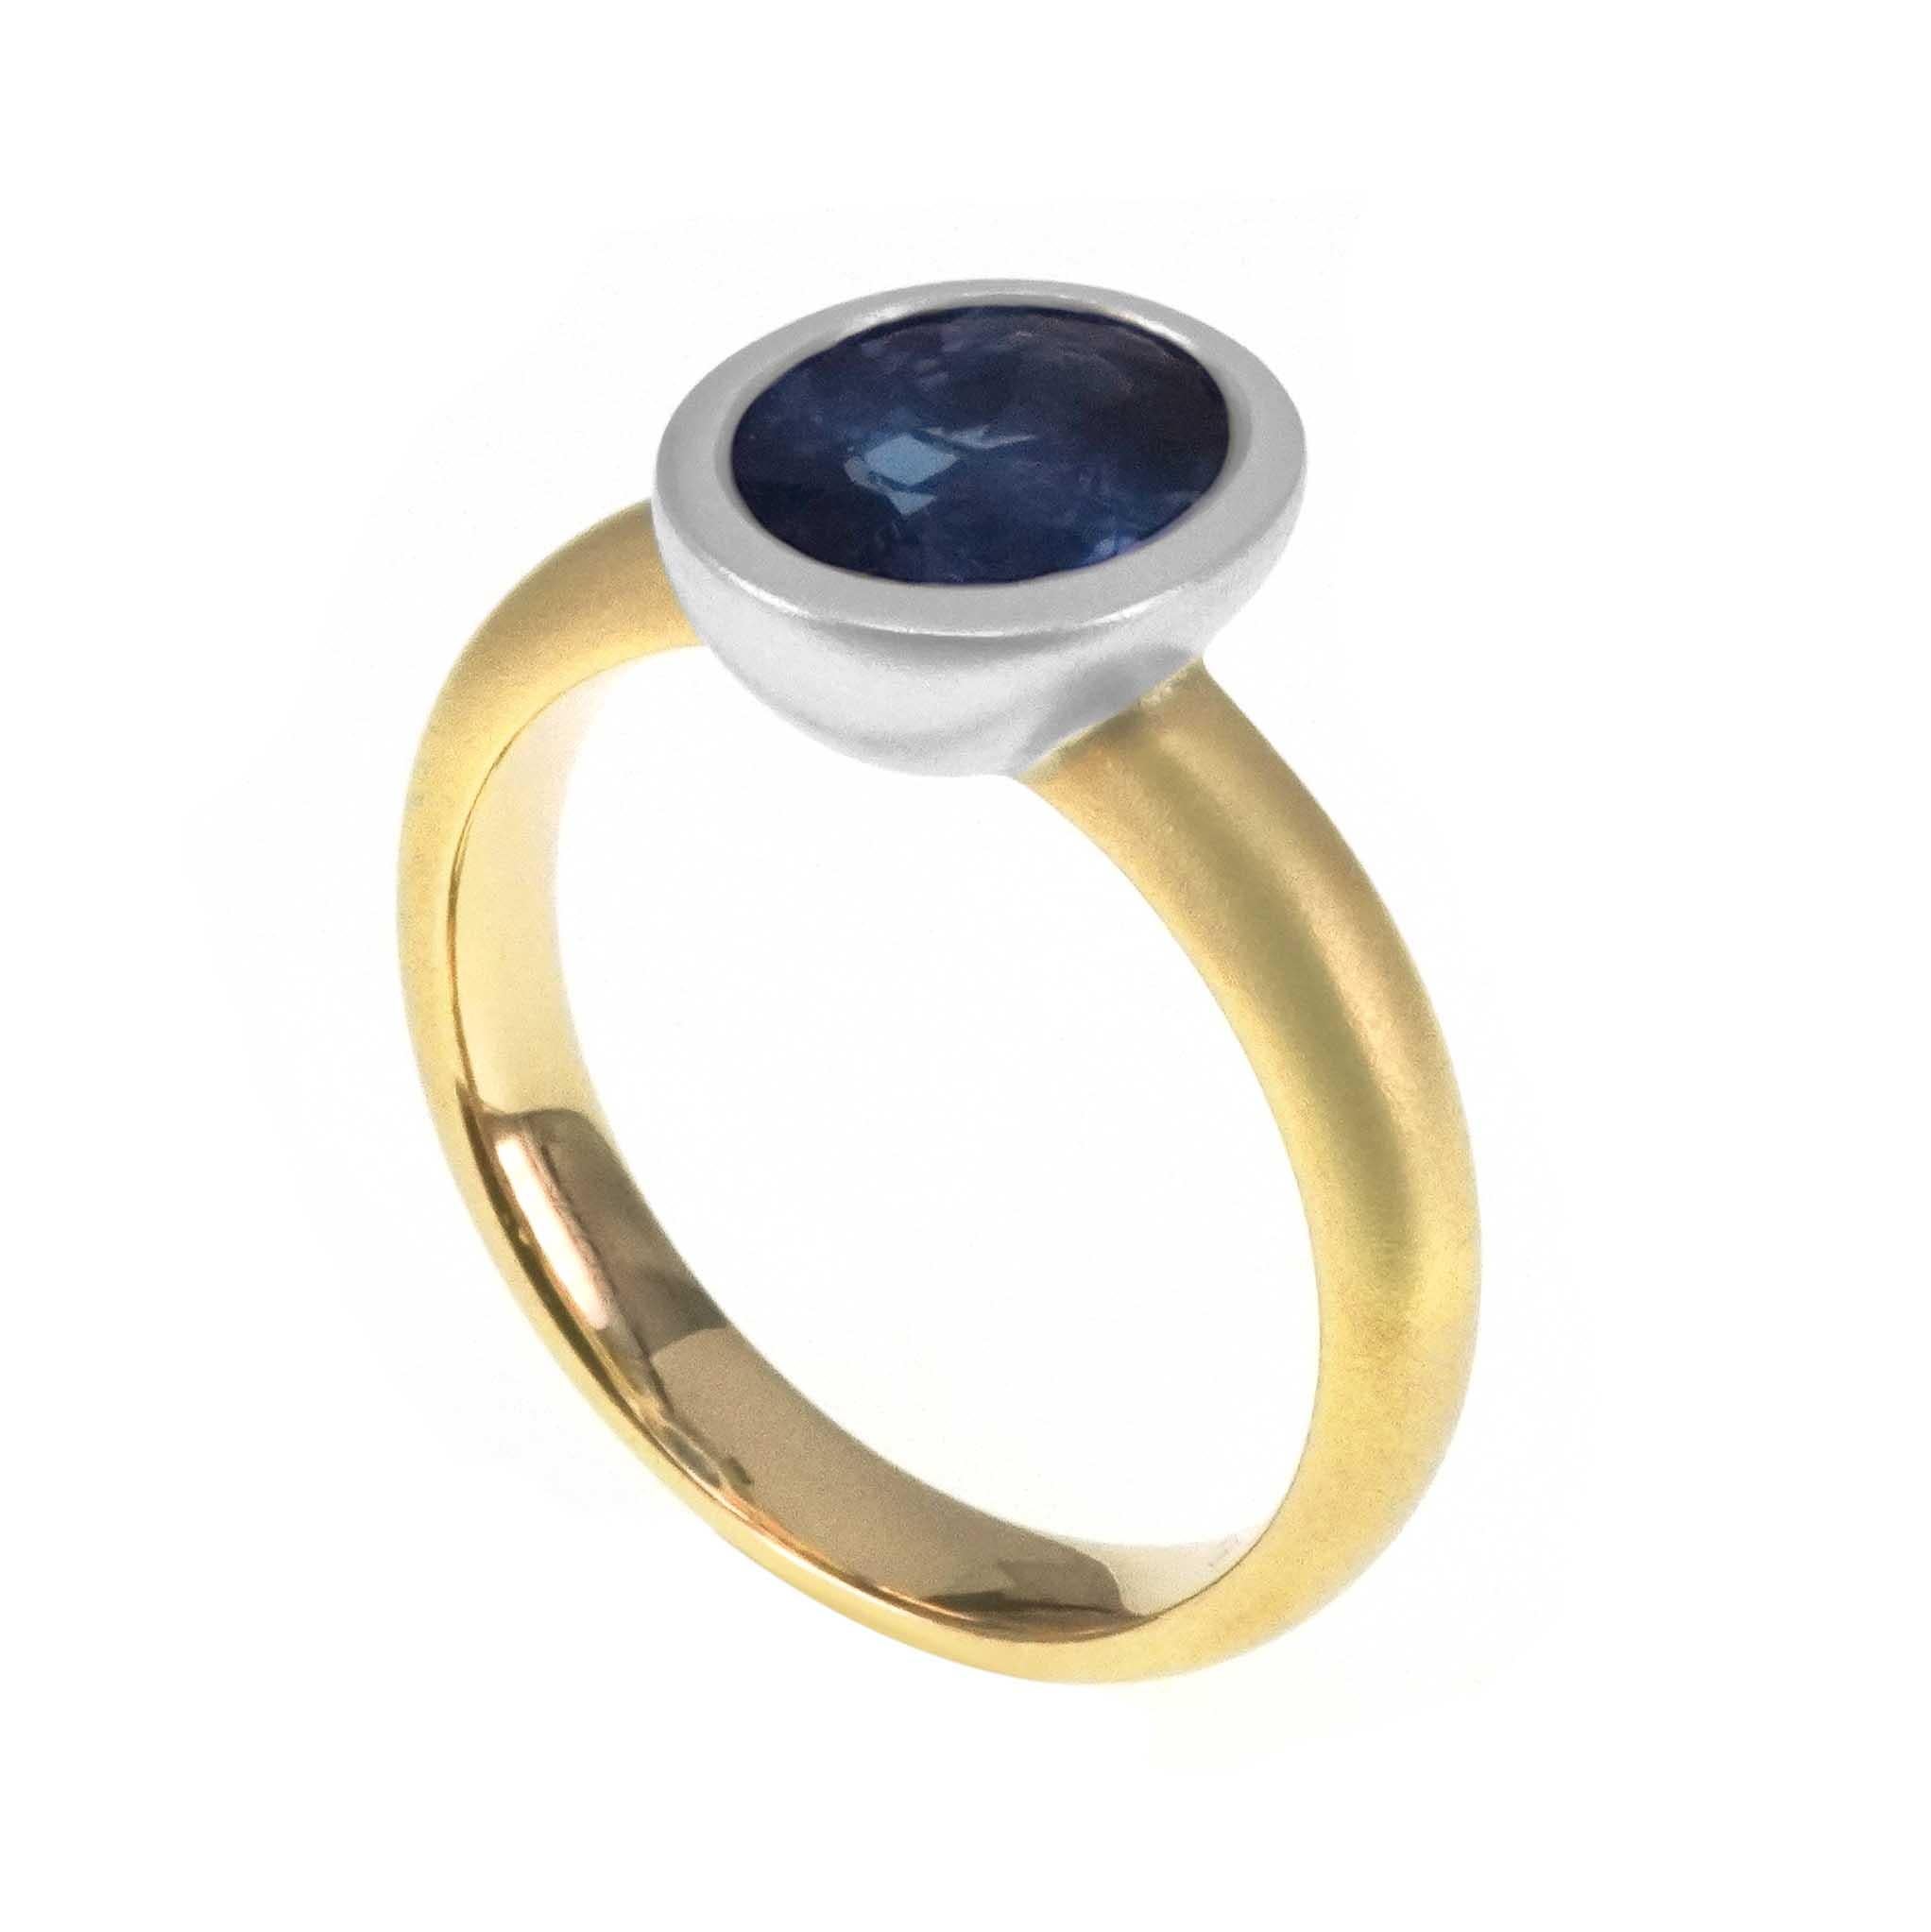 Contemporary AGK Japan Lab Certified 2.23 Carat Vivid Blue Sapphire 18k Italian Finish Ring For Sale